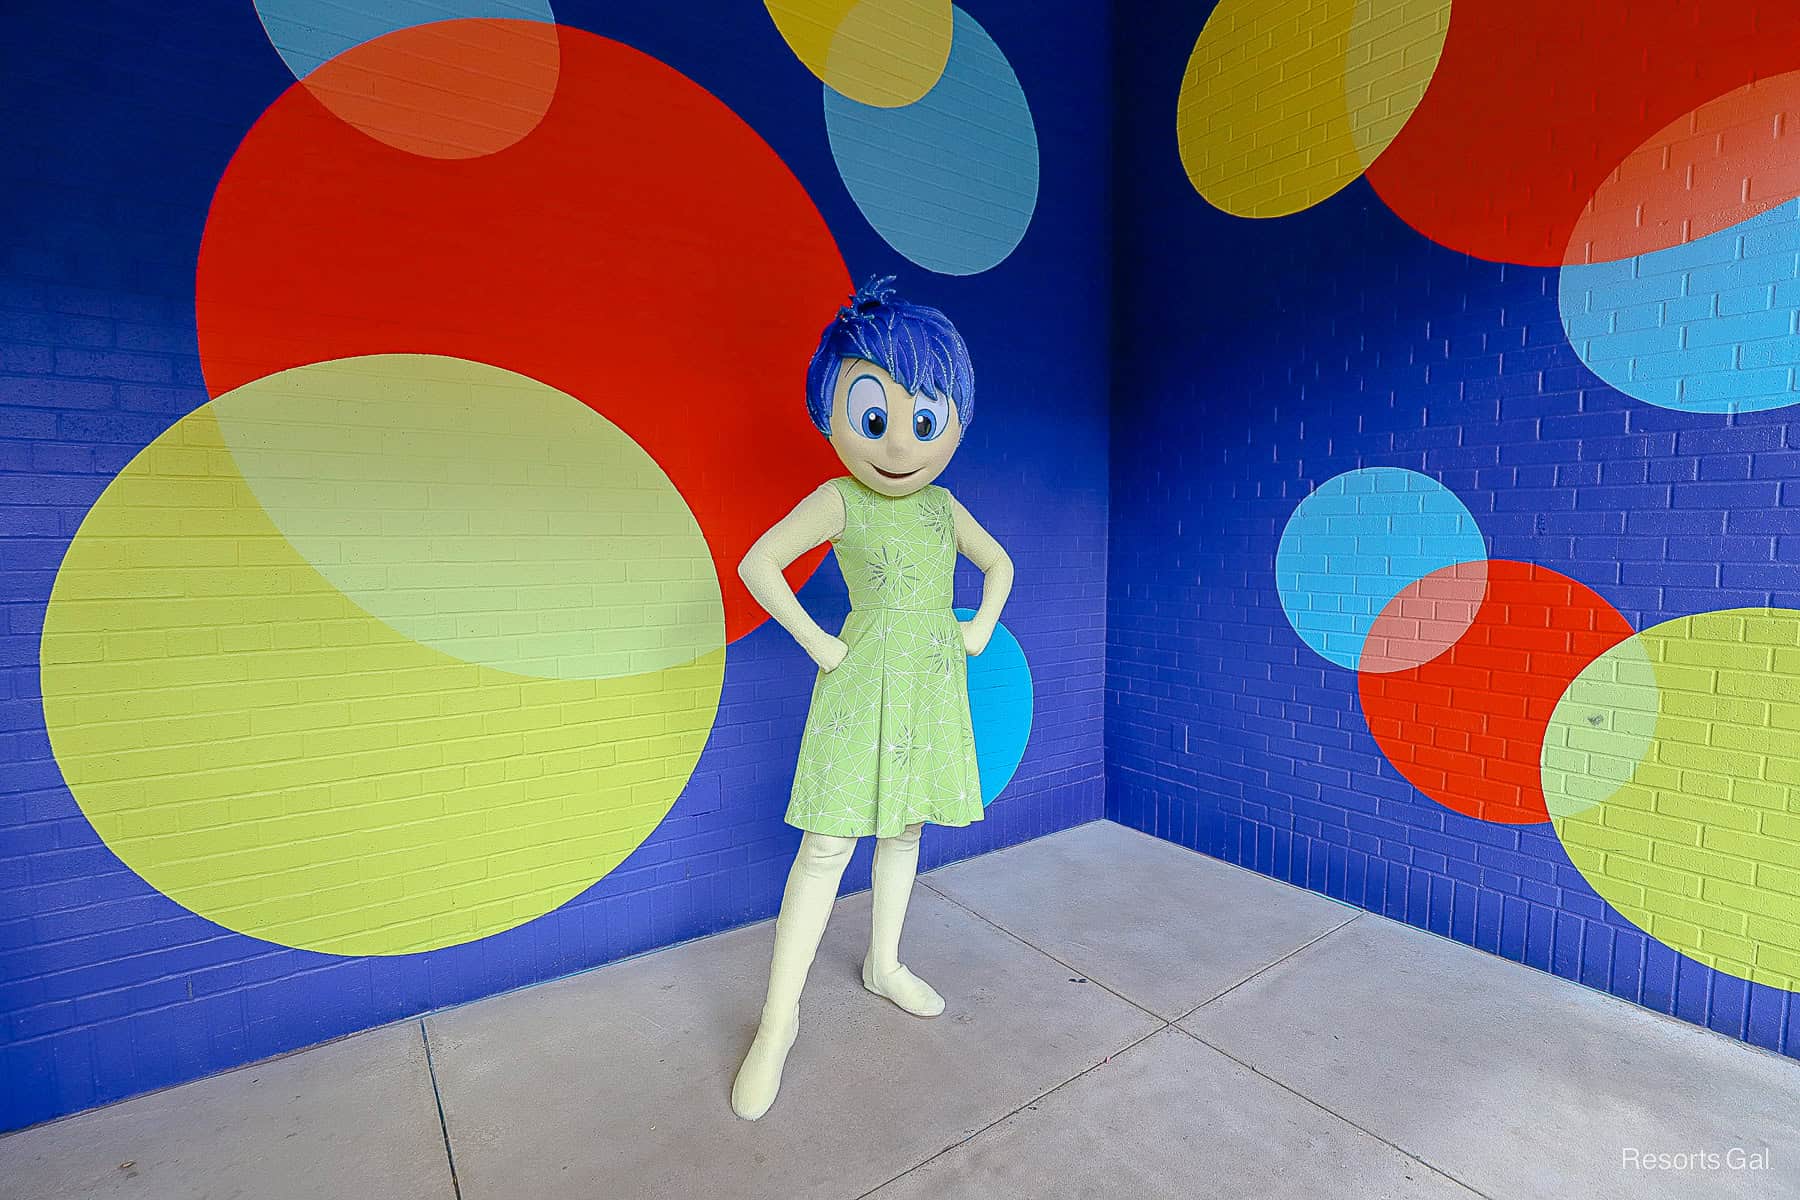 Joy poses with hands on her hips. She has blue hair and a green dress. 